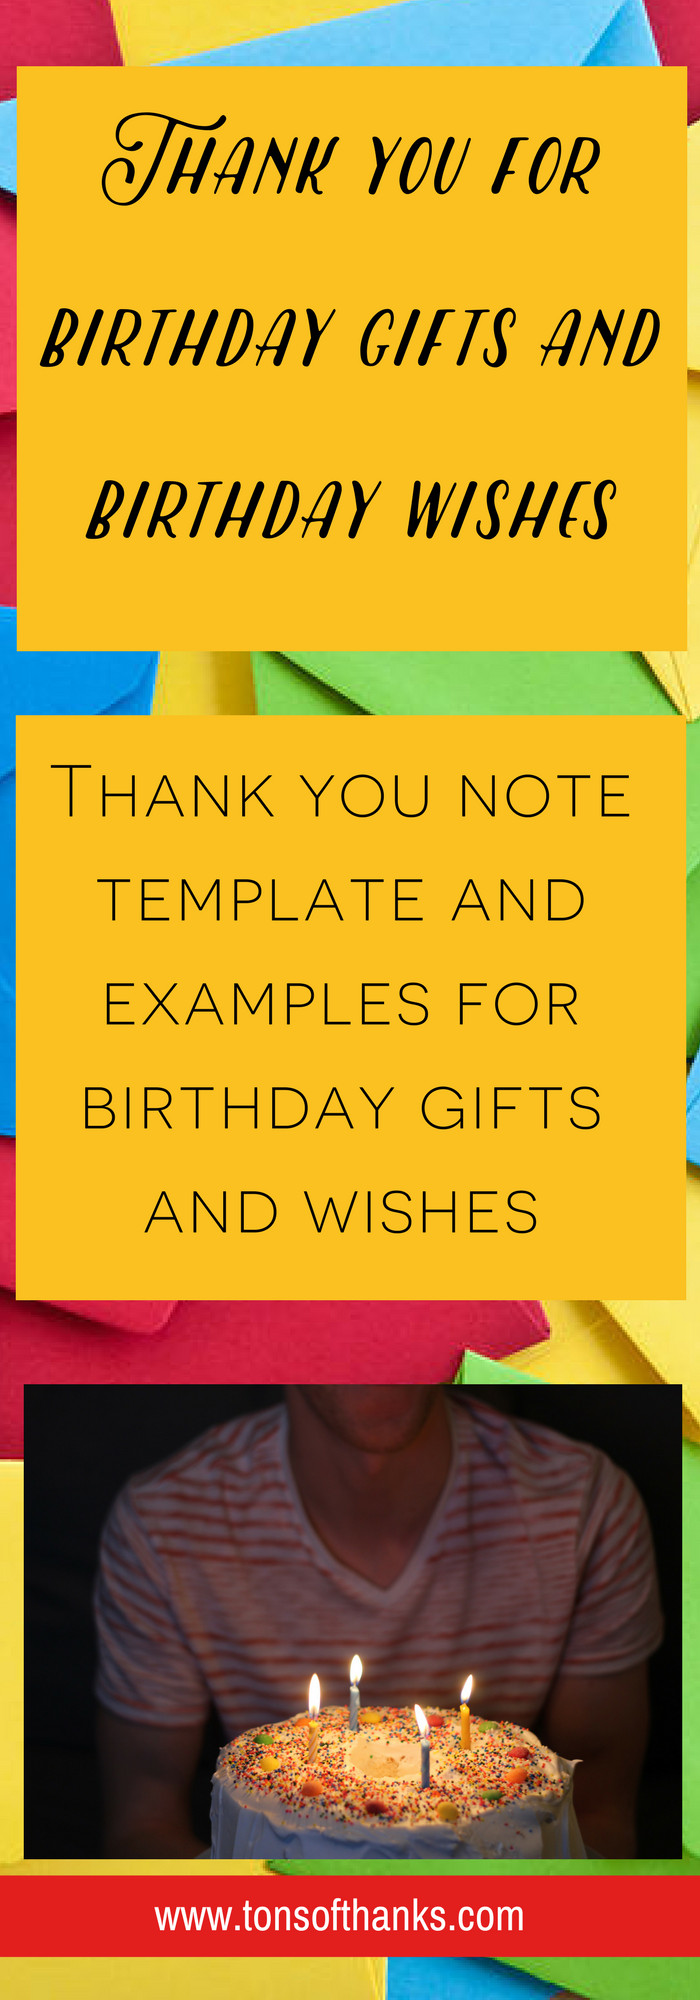 Sample Birthday Wishes
 Thank you for the birthday wishes Thank you note examples